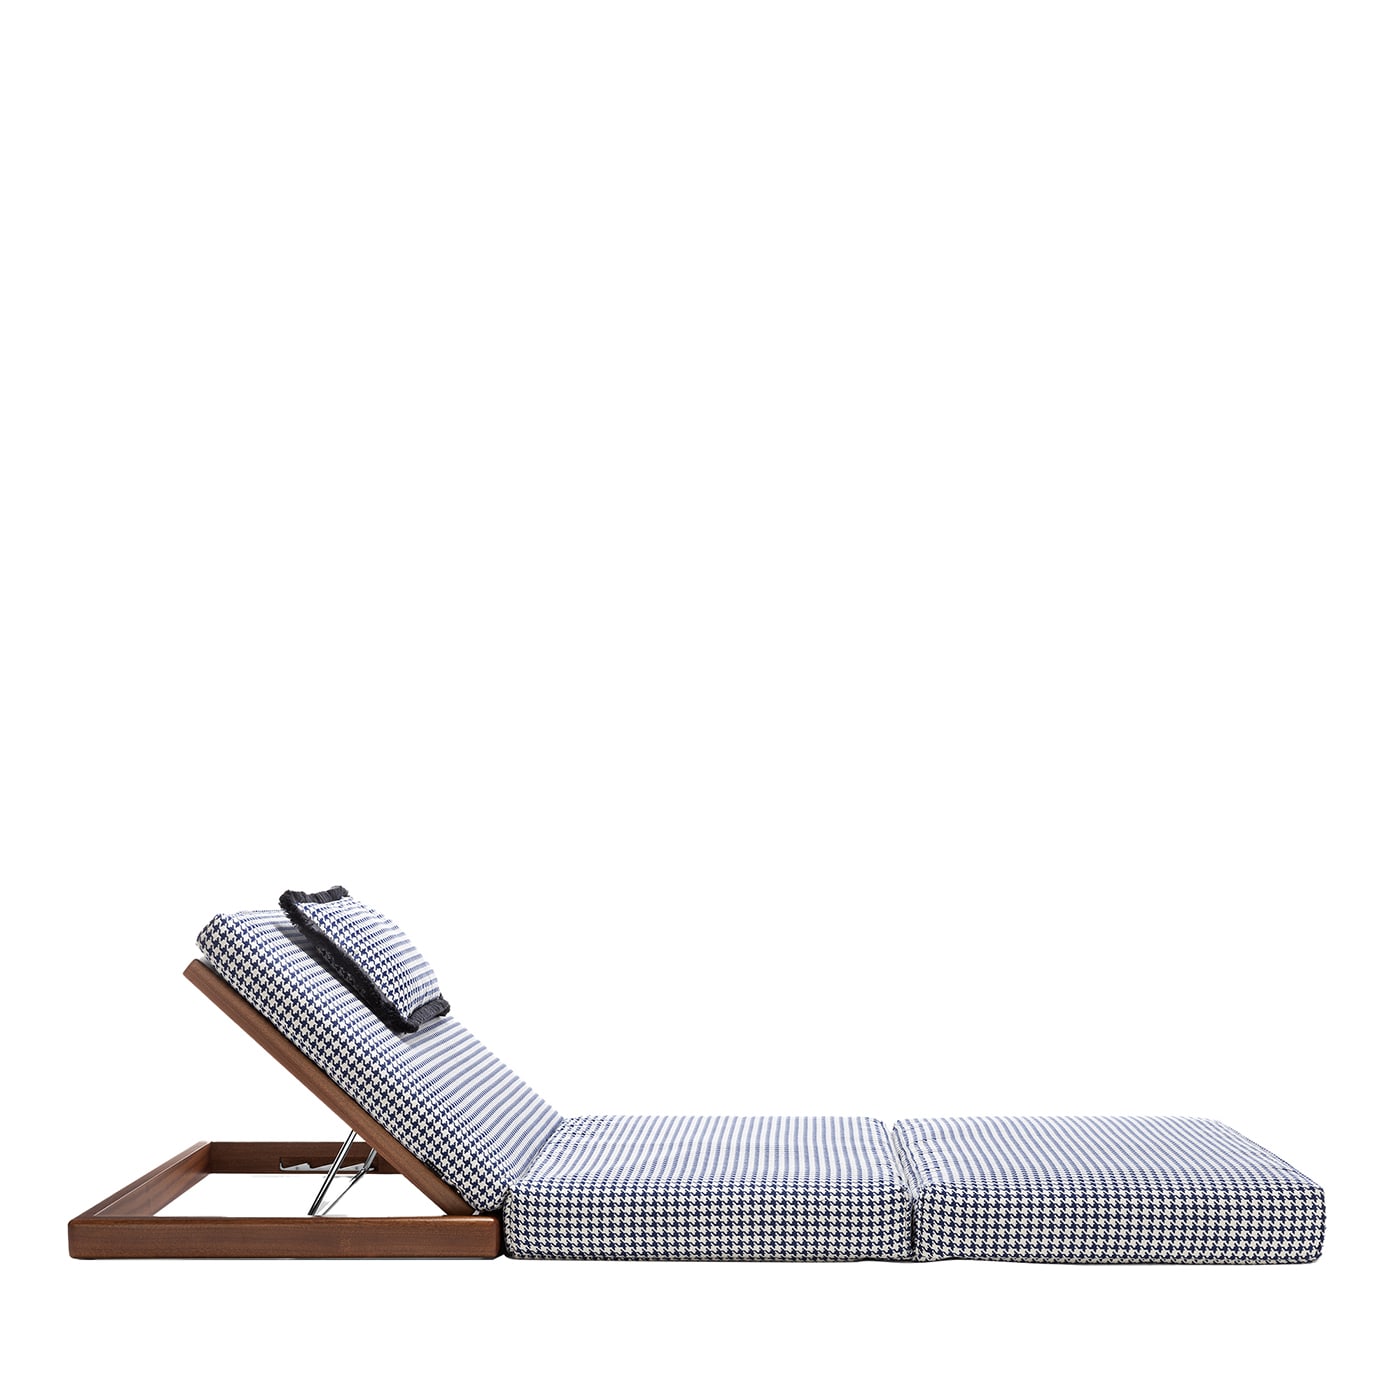 Sunset Poolside Daybed by Paola Navone - Exteta